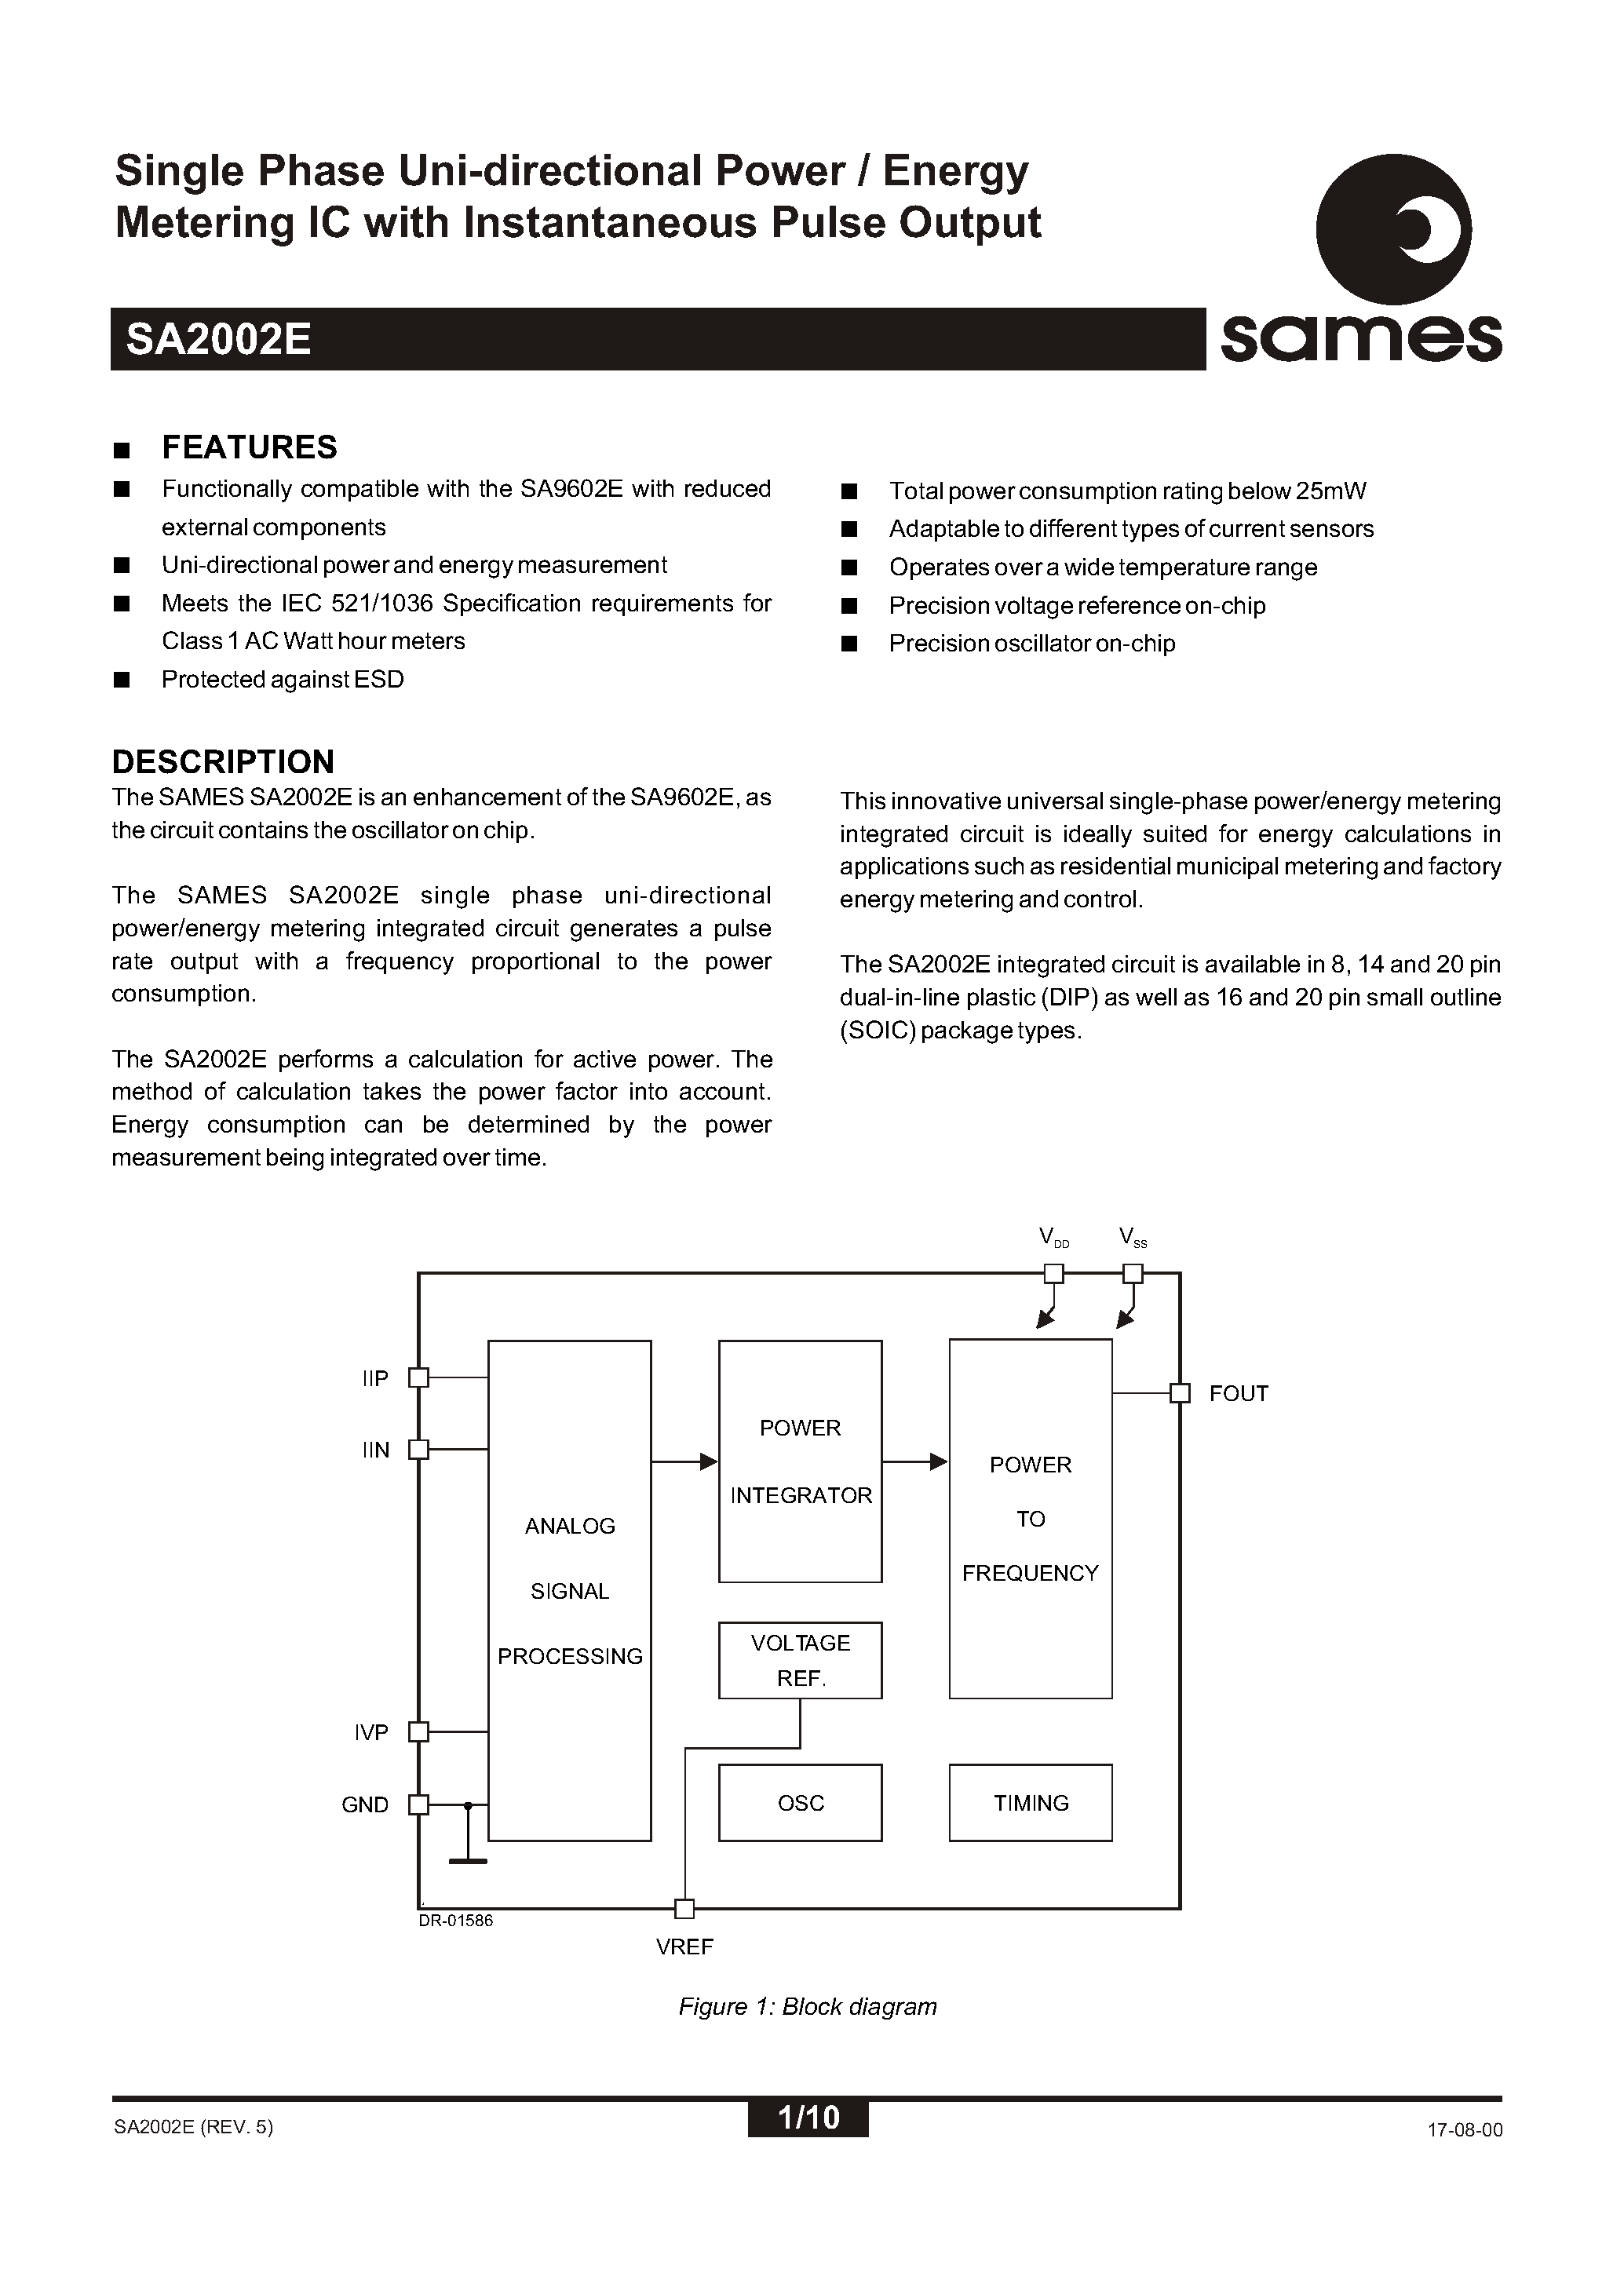 Datasheet SA2002EPA - Single Phase Uni-directional Power / Energy Metering IC with Instantaneous Pulse Output page 1